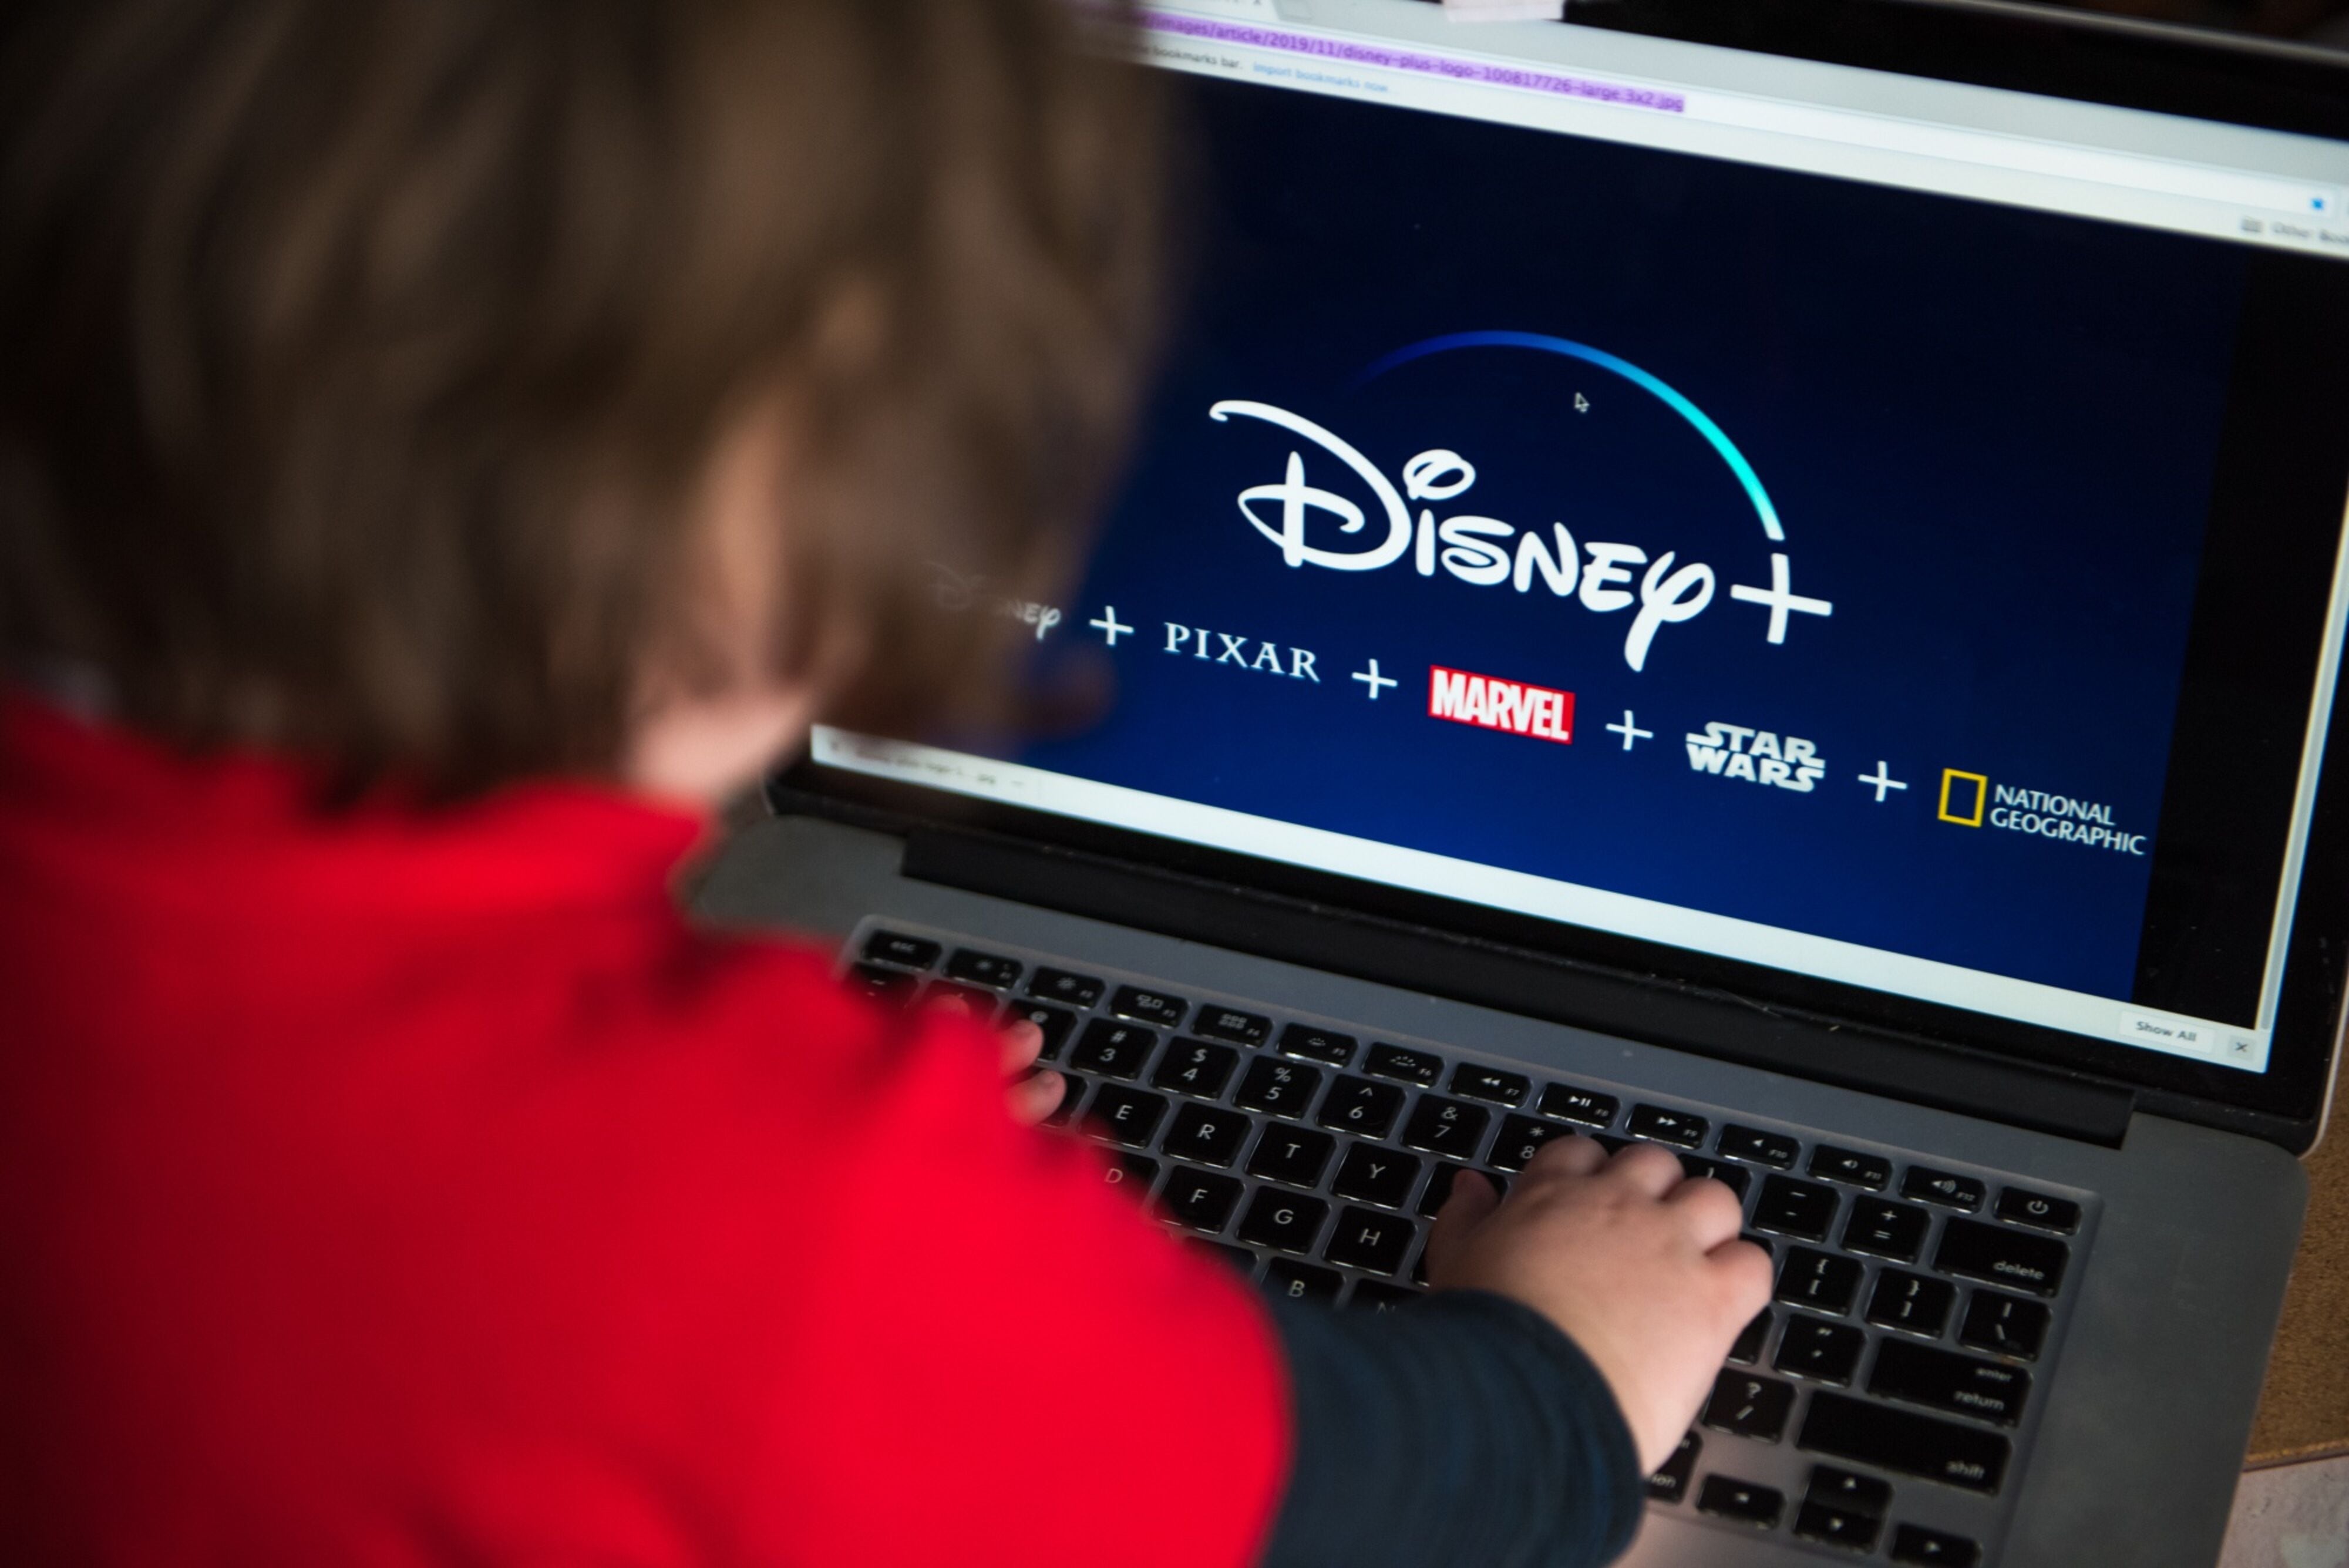 Disney+ loses “brightness”: number of subscribers falls and “pulls” company shares